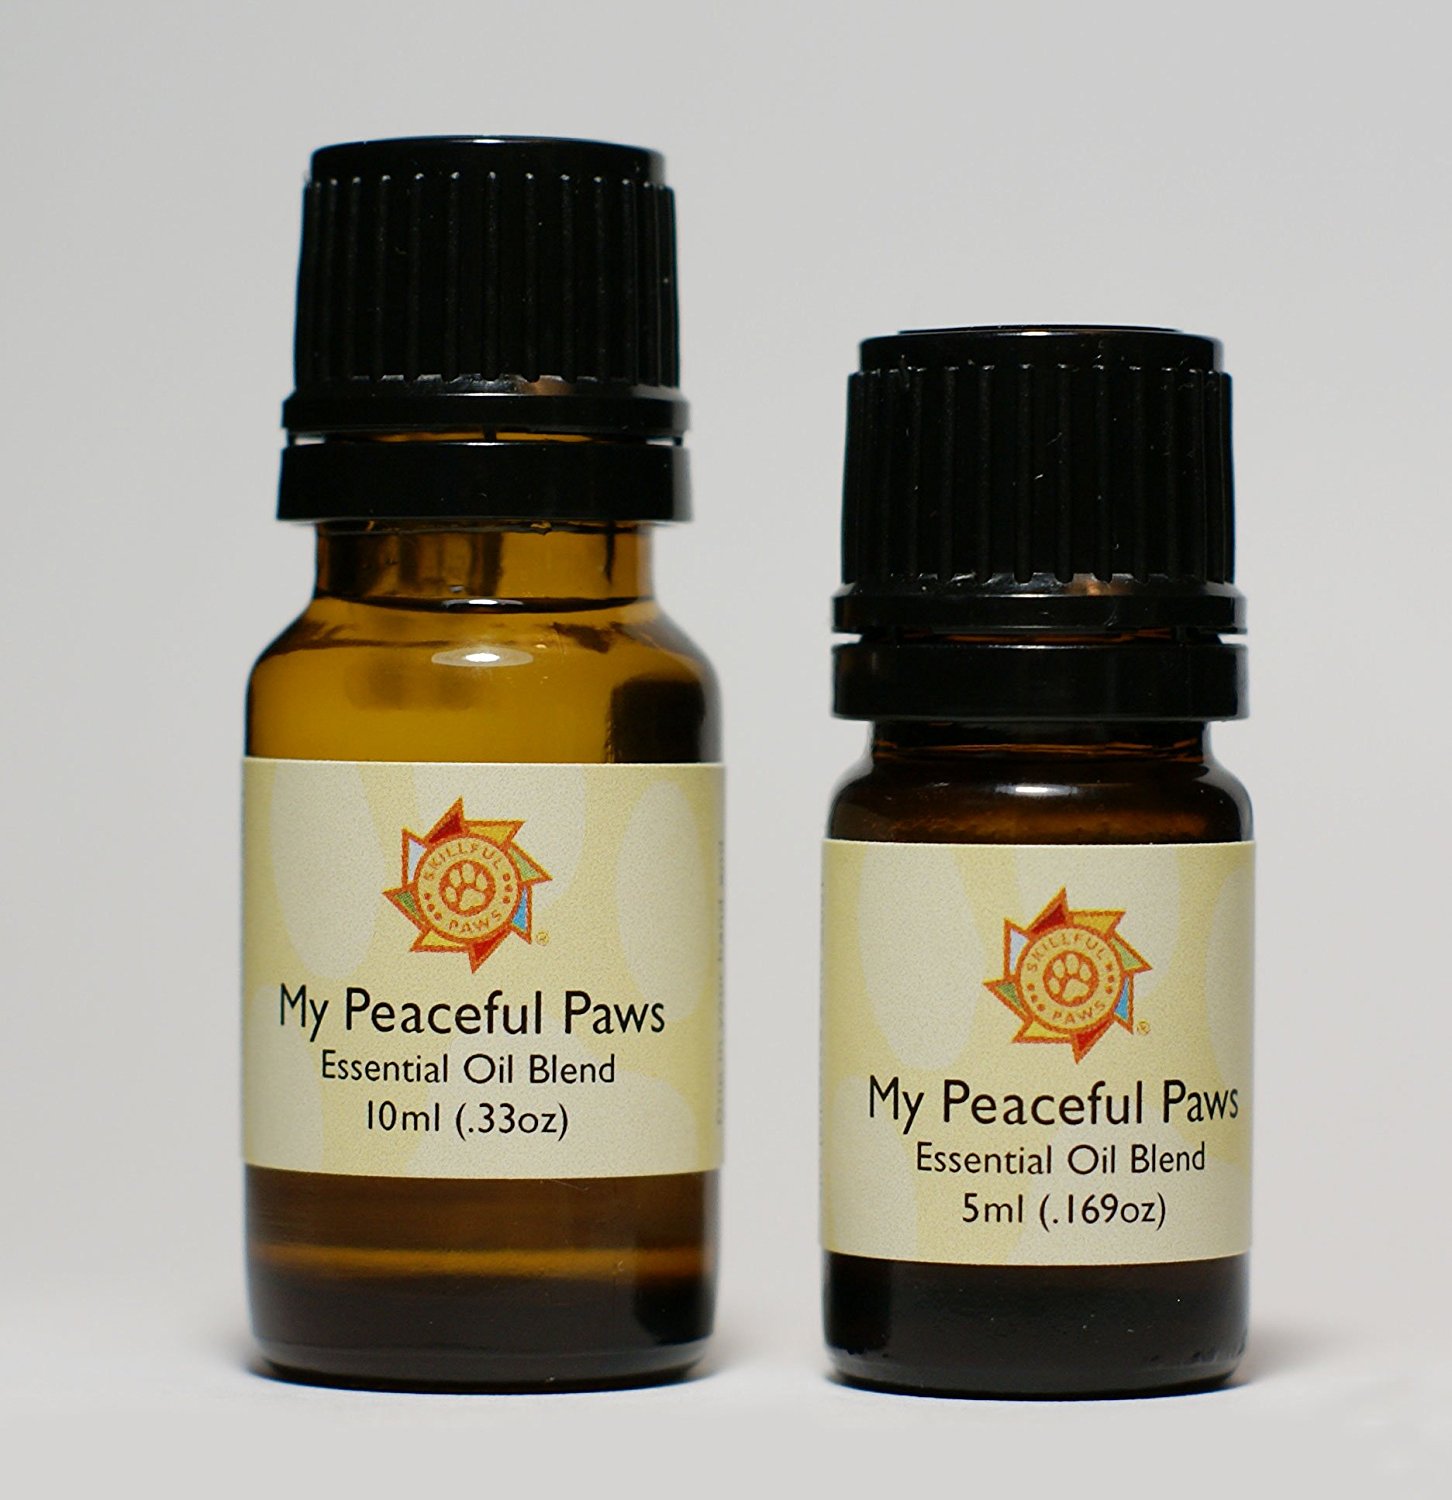 My Peaceful Paws oil blend